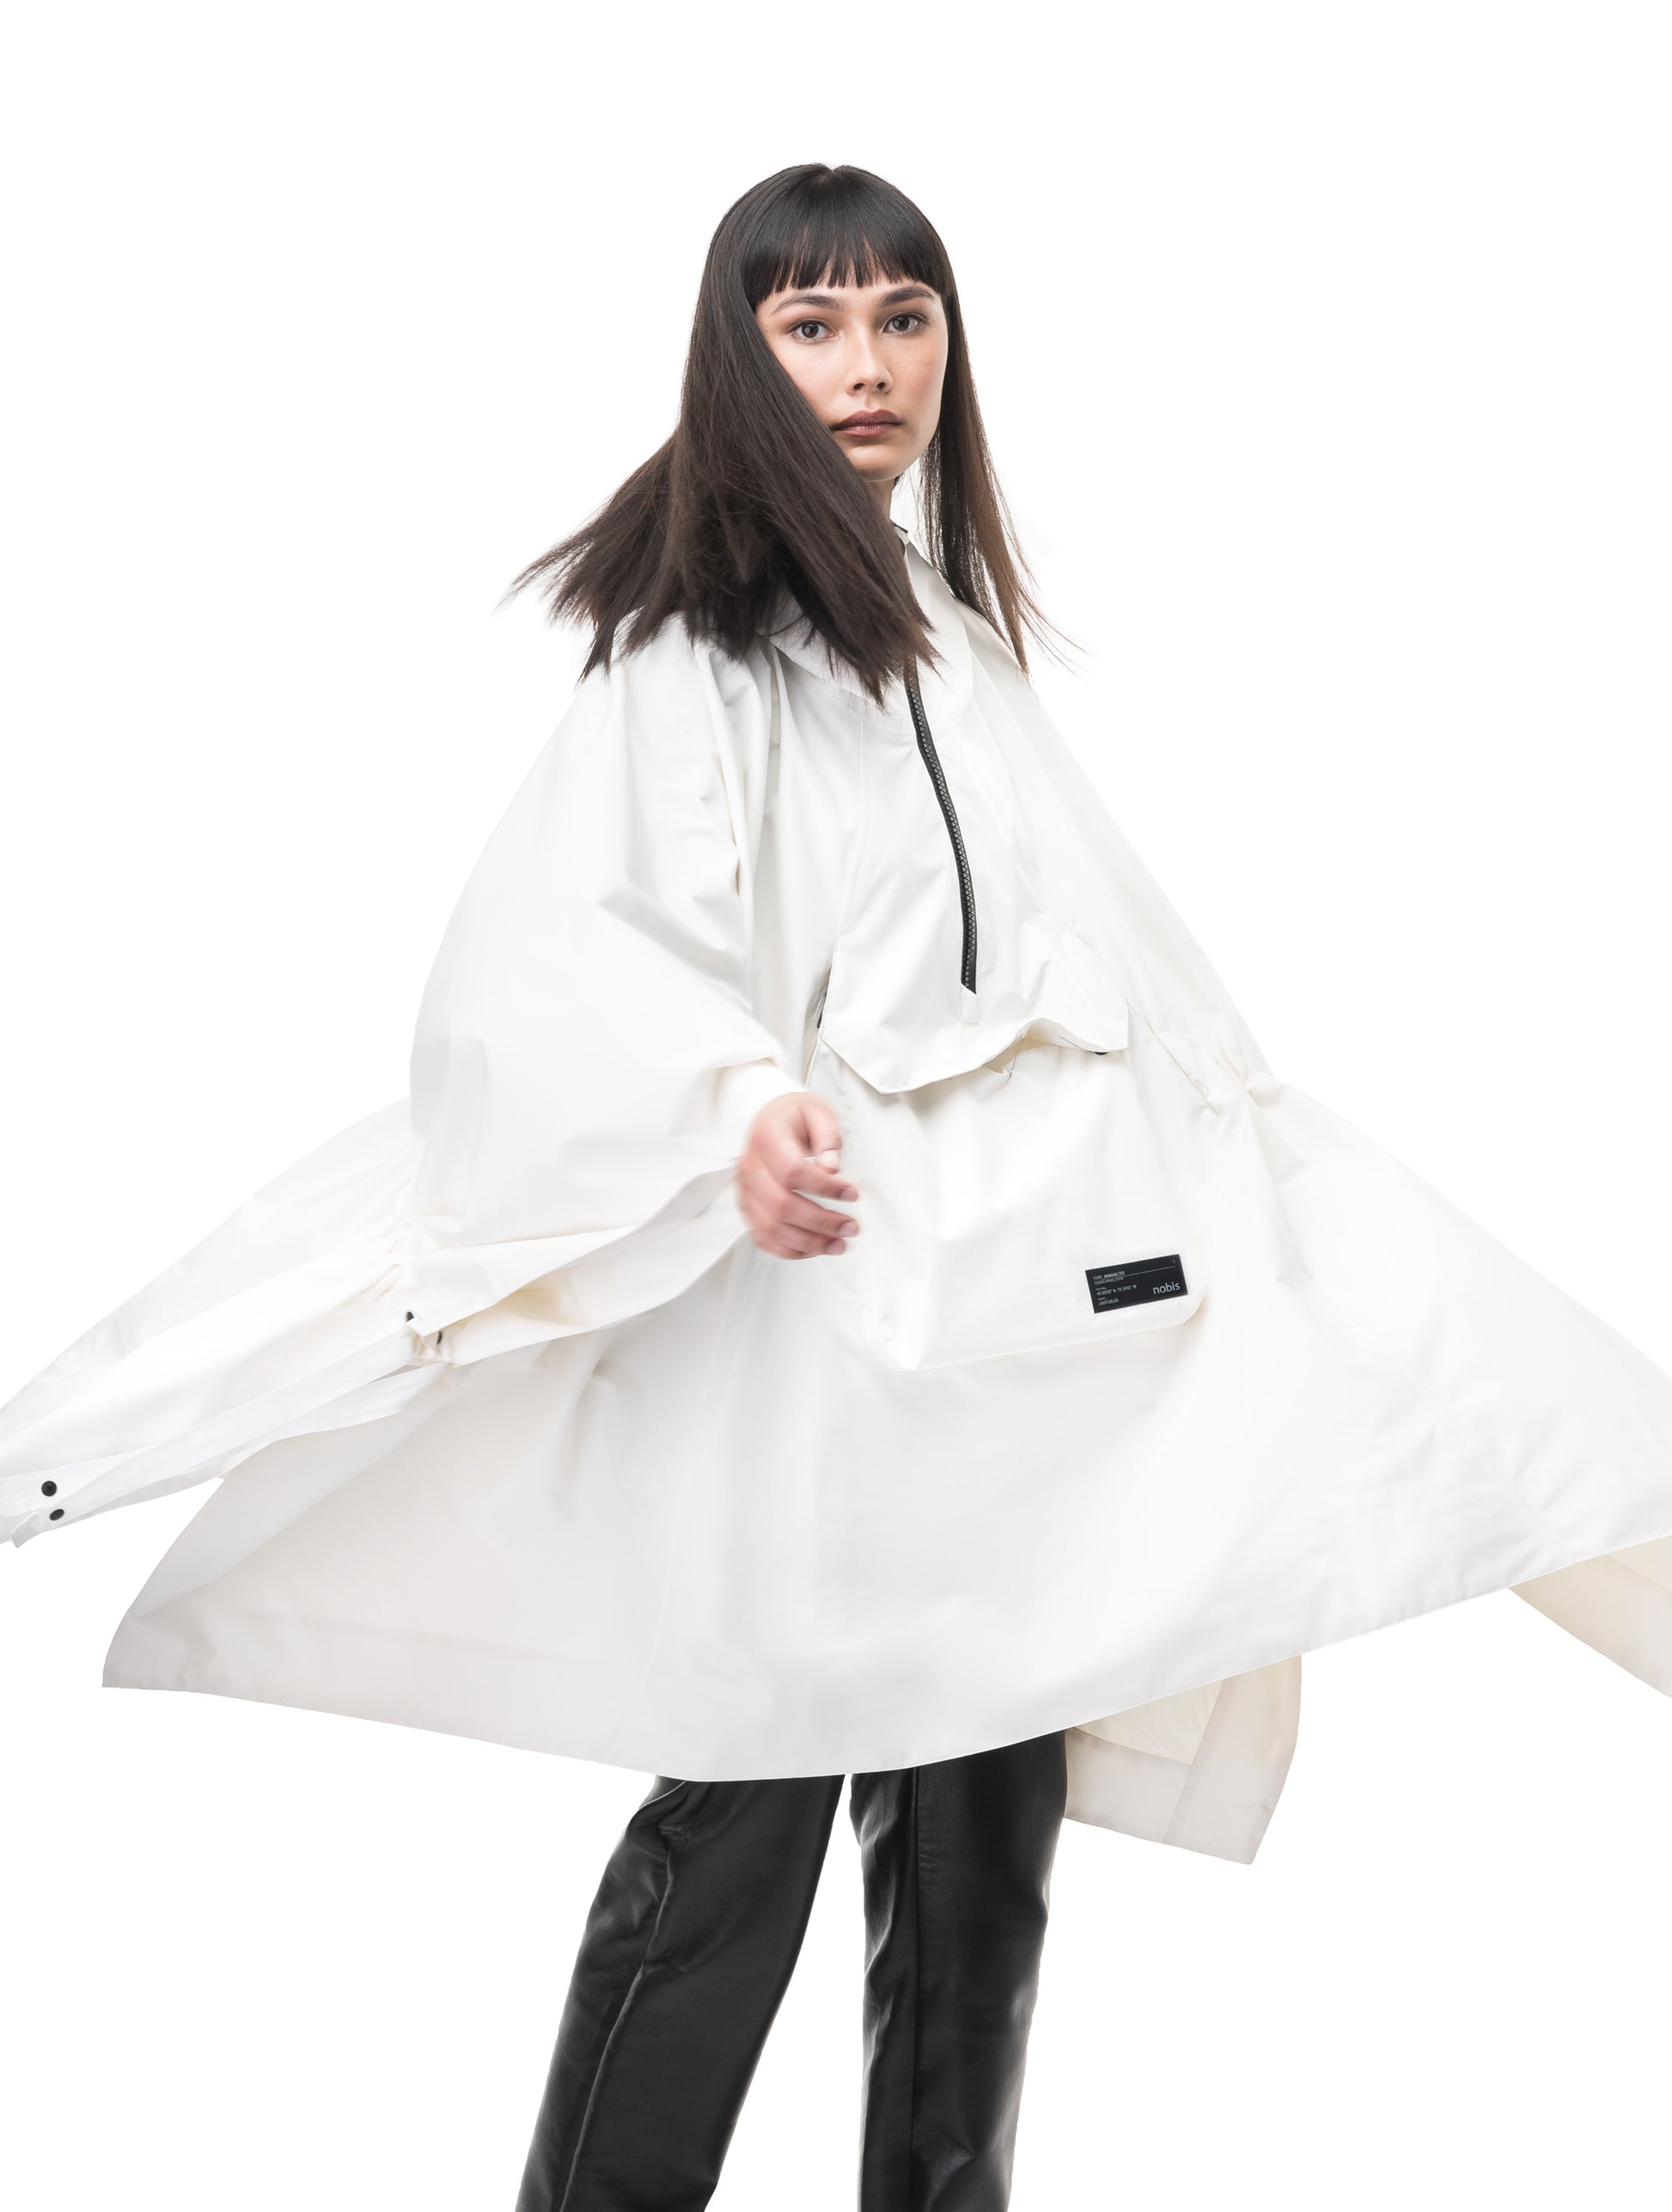 Hydra Unisex Performance Poncho in thigh length, non-removable hood, vertical half-zipper along centre front collar, hidden side-entry waist zipper pockets, adjustable webbing straps and snap closure cuffs, and packable to front kangaroo pocket with flap opening, in Chalk